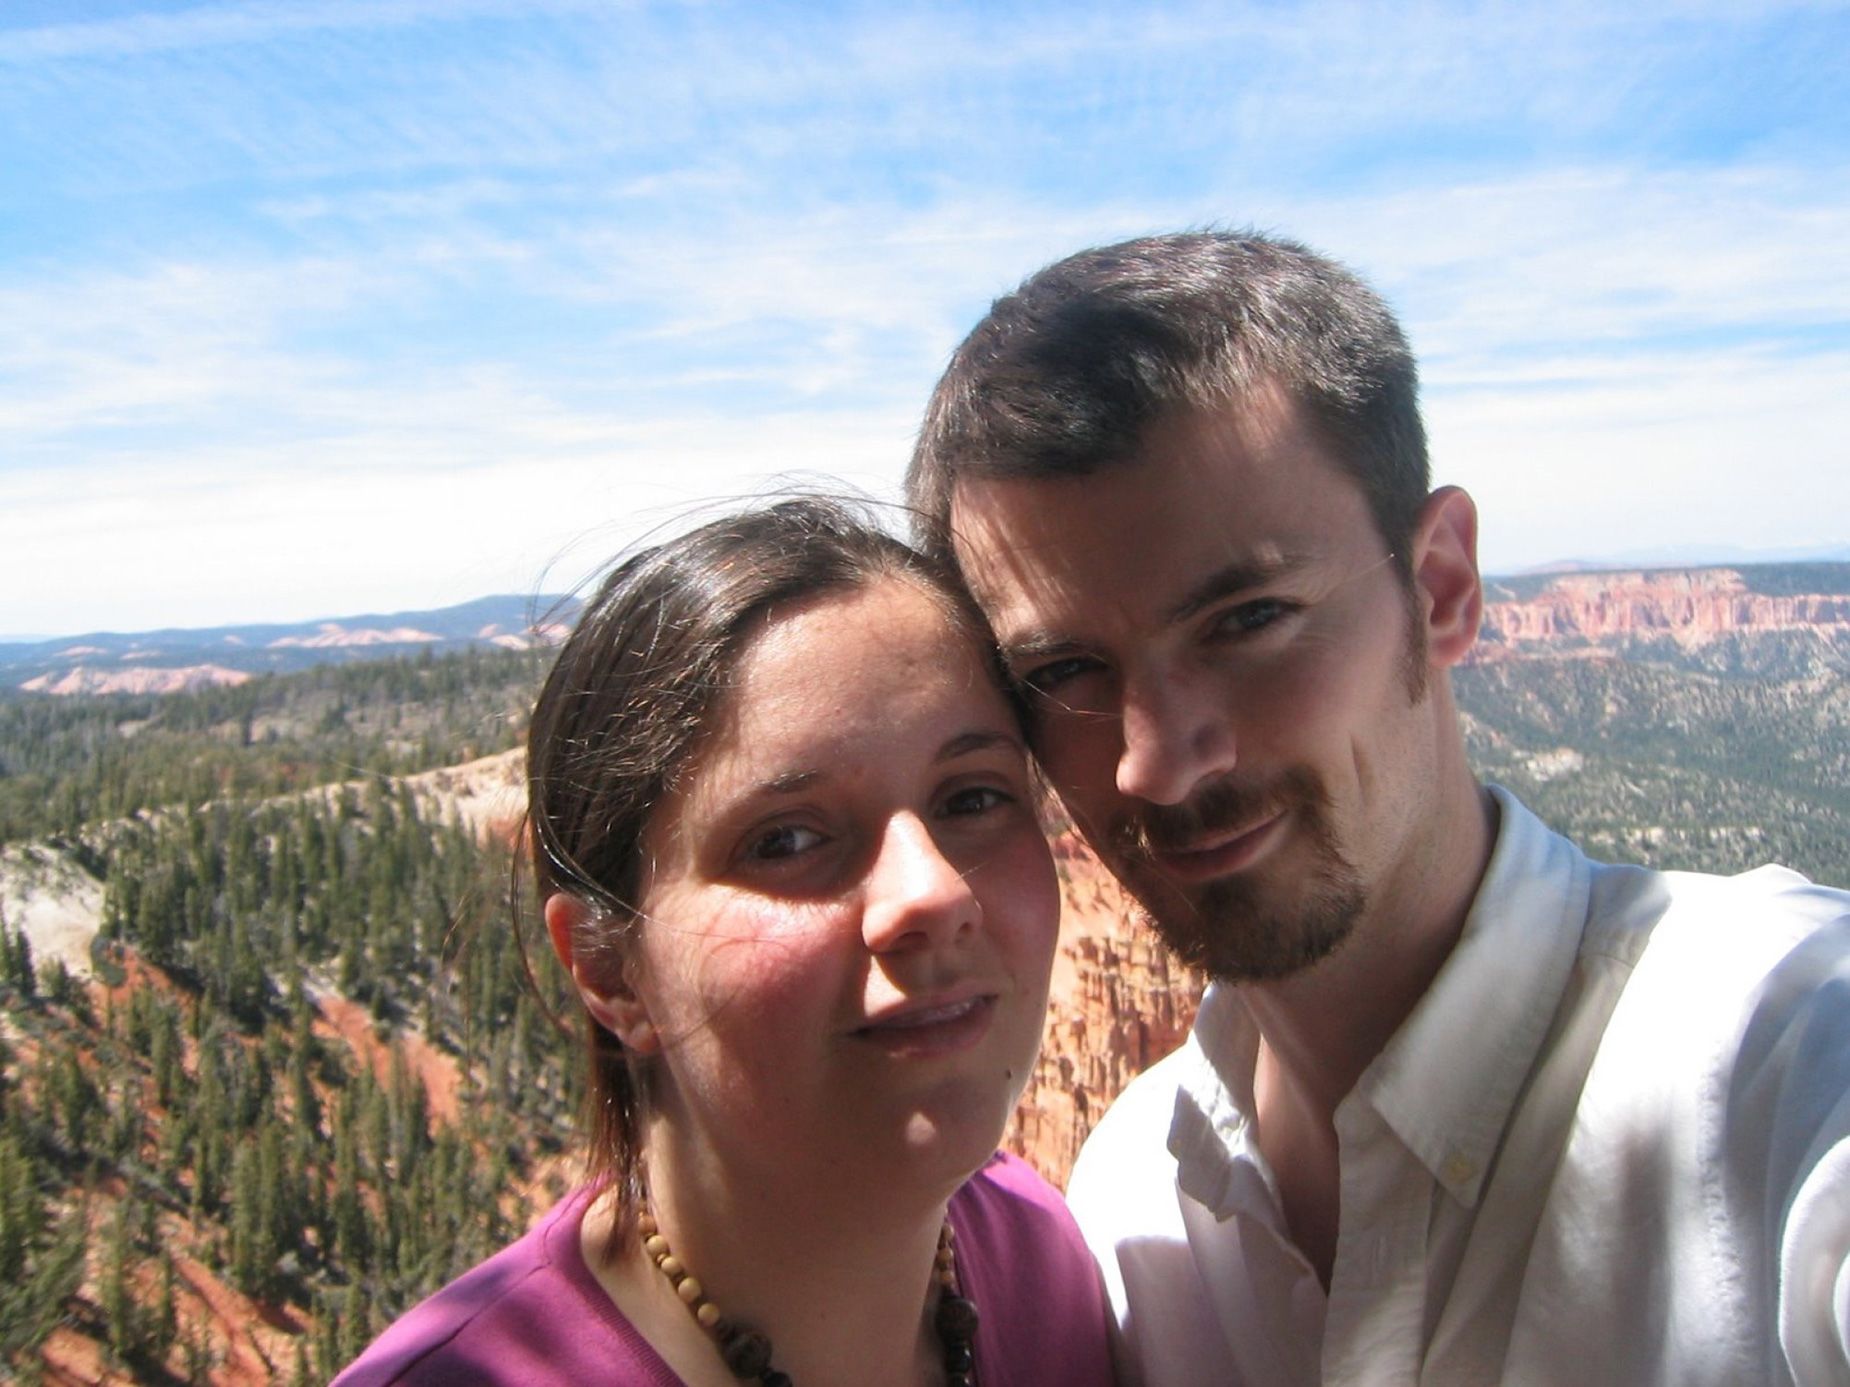 After Dan visited Gabriella in Italy, Gabriella visited Dan in the US. Here they are at Bryce Canyon.